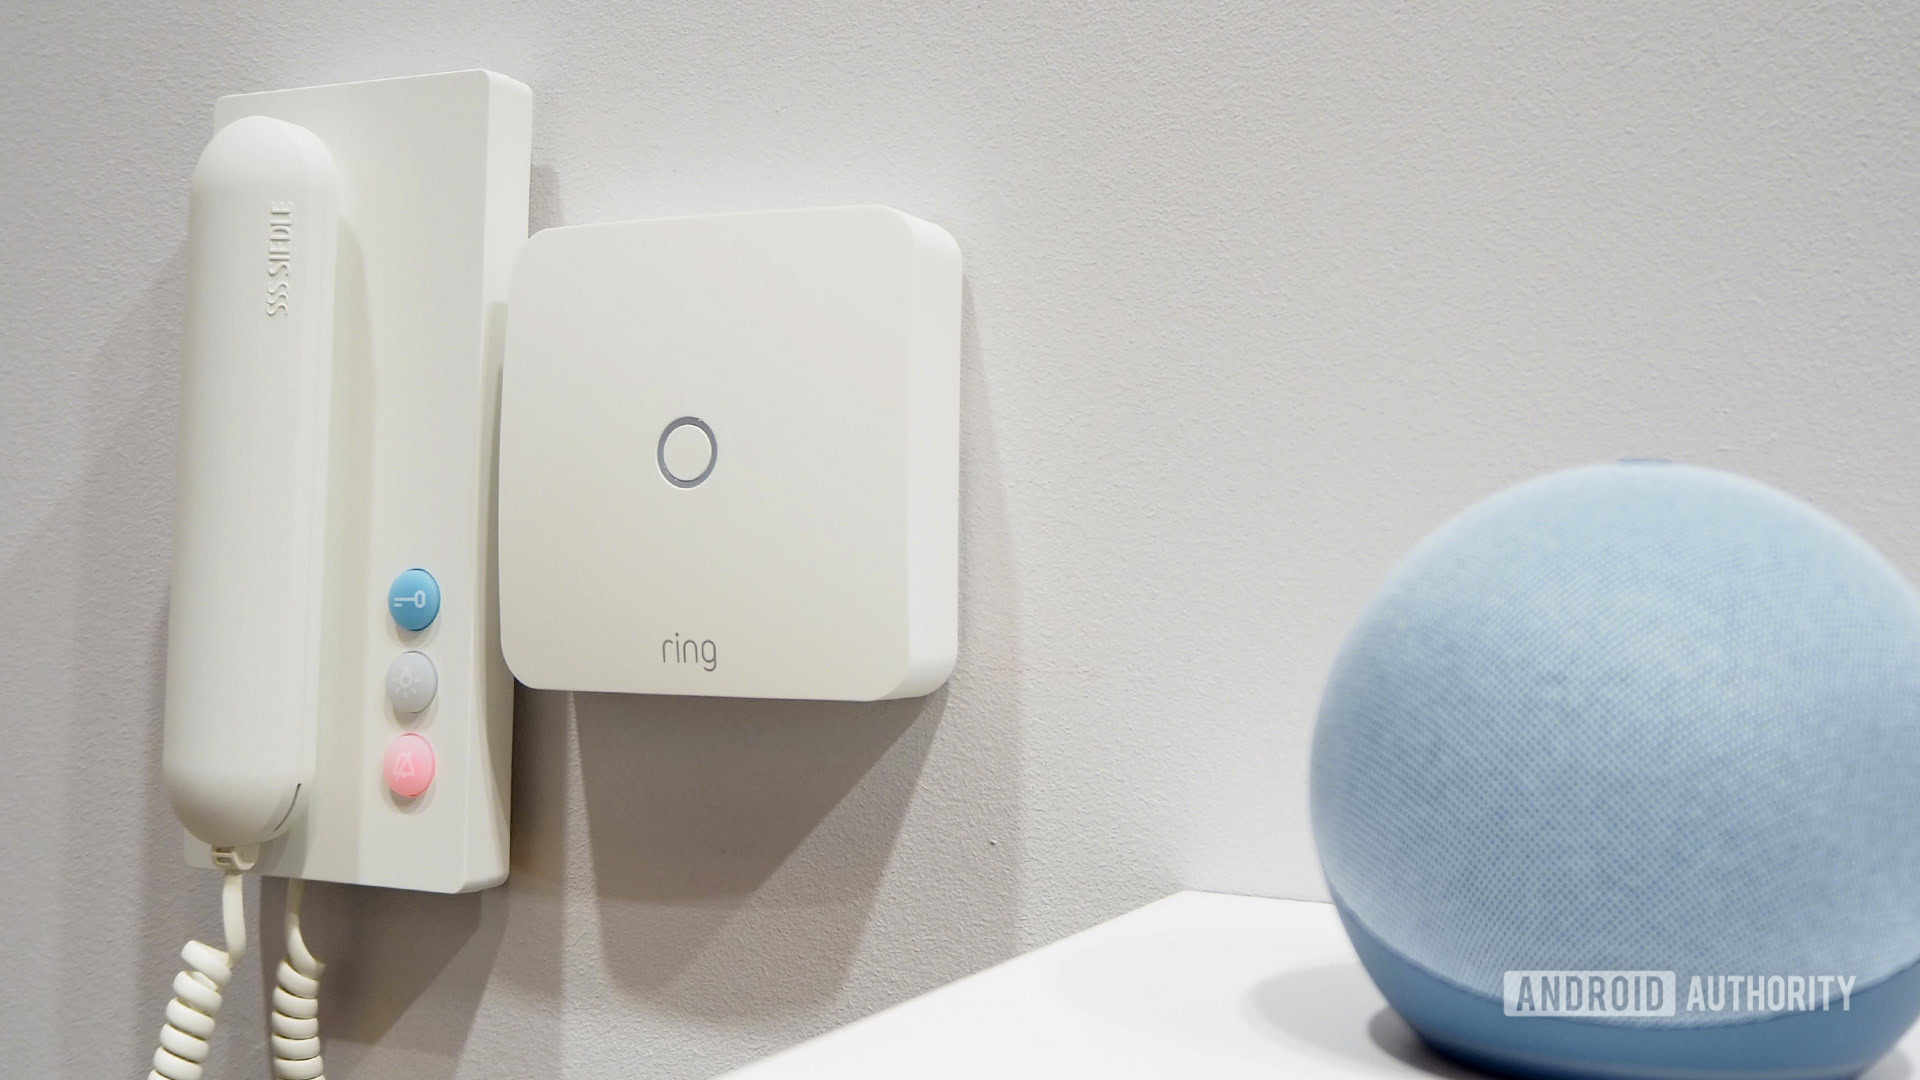 Ring Intercom: an accessible and secure addition to your home